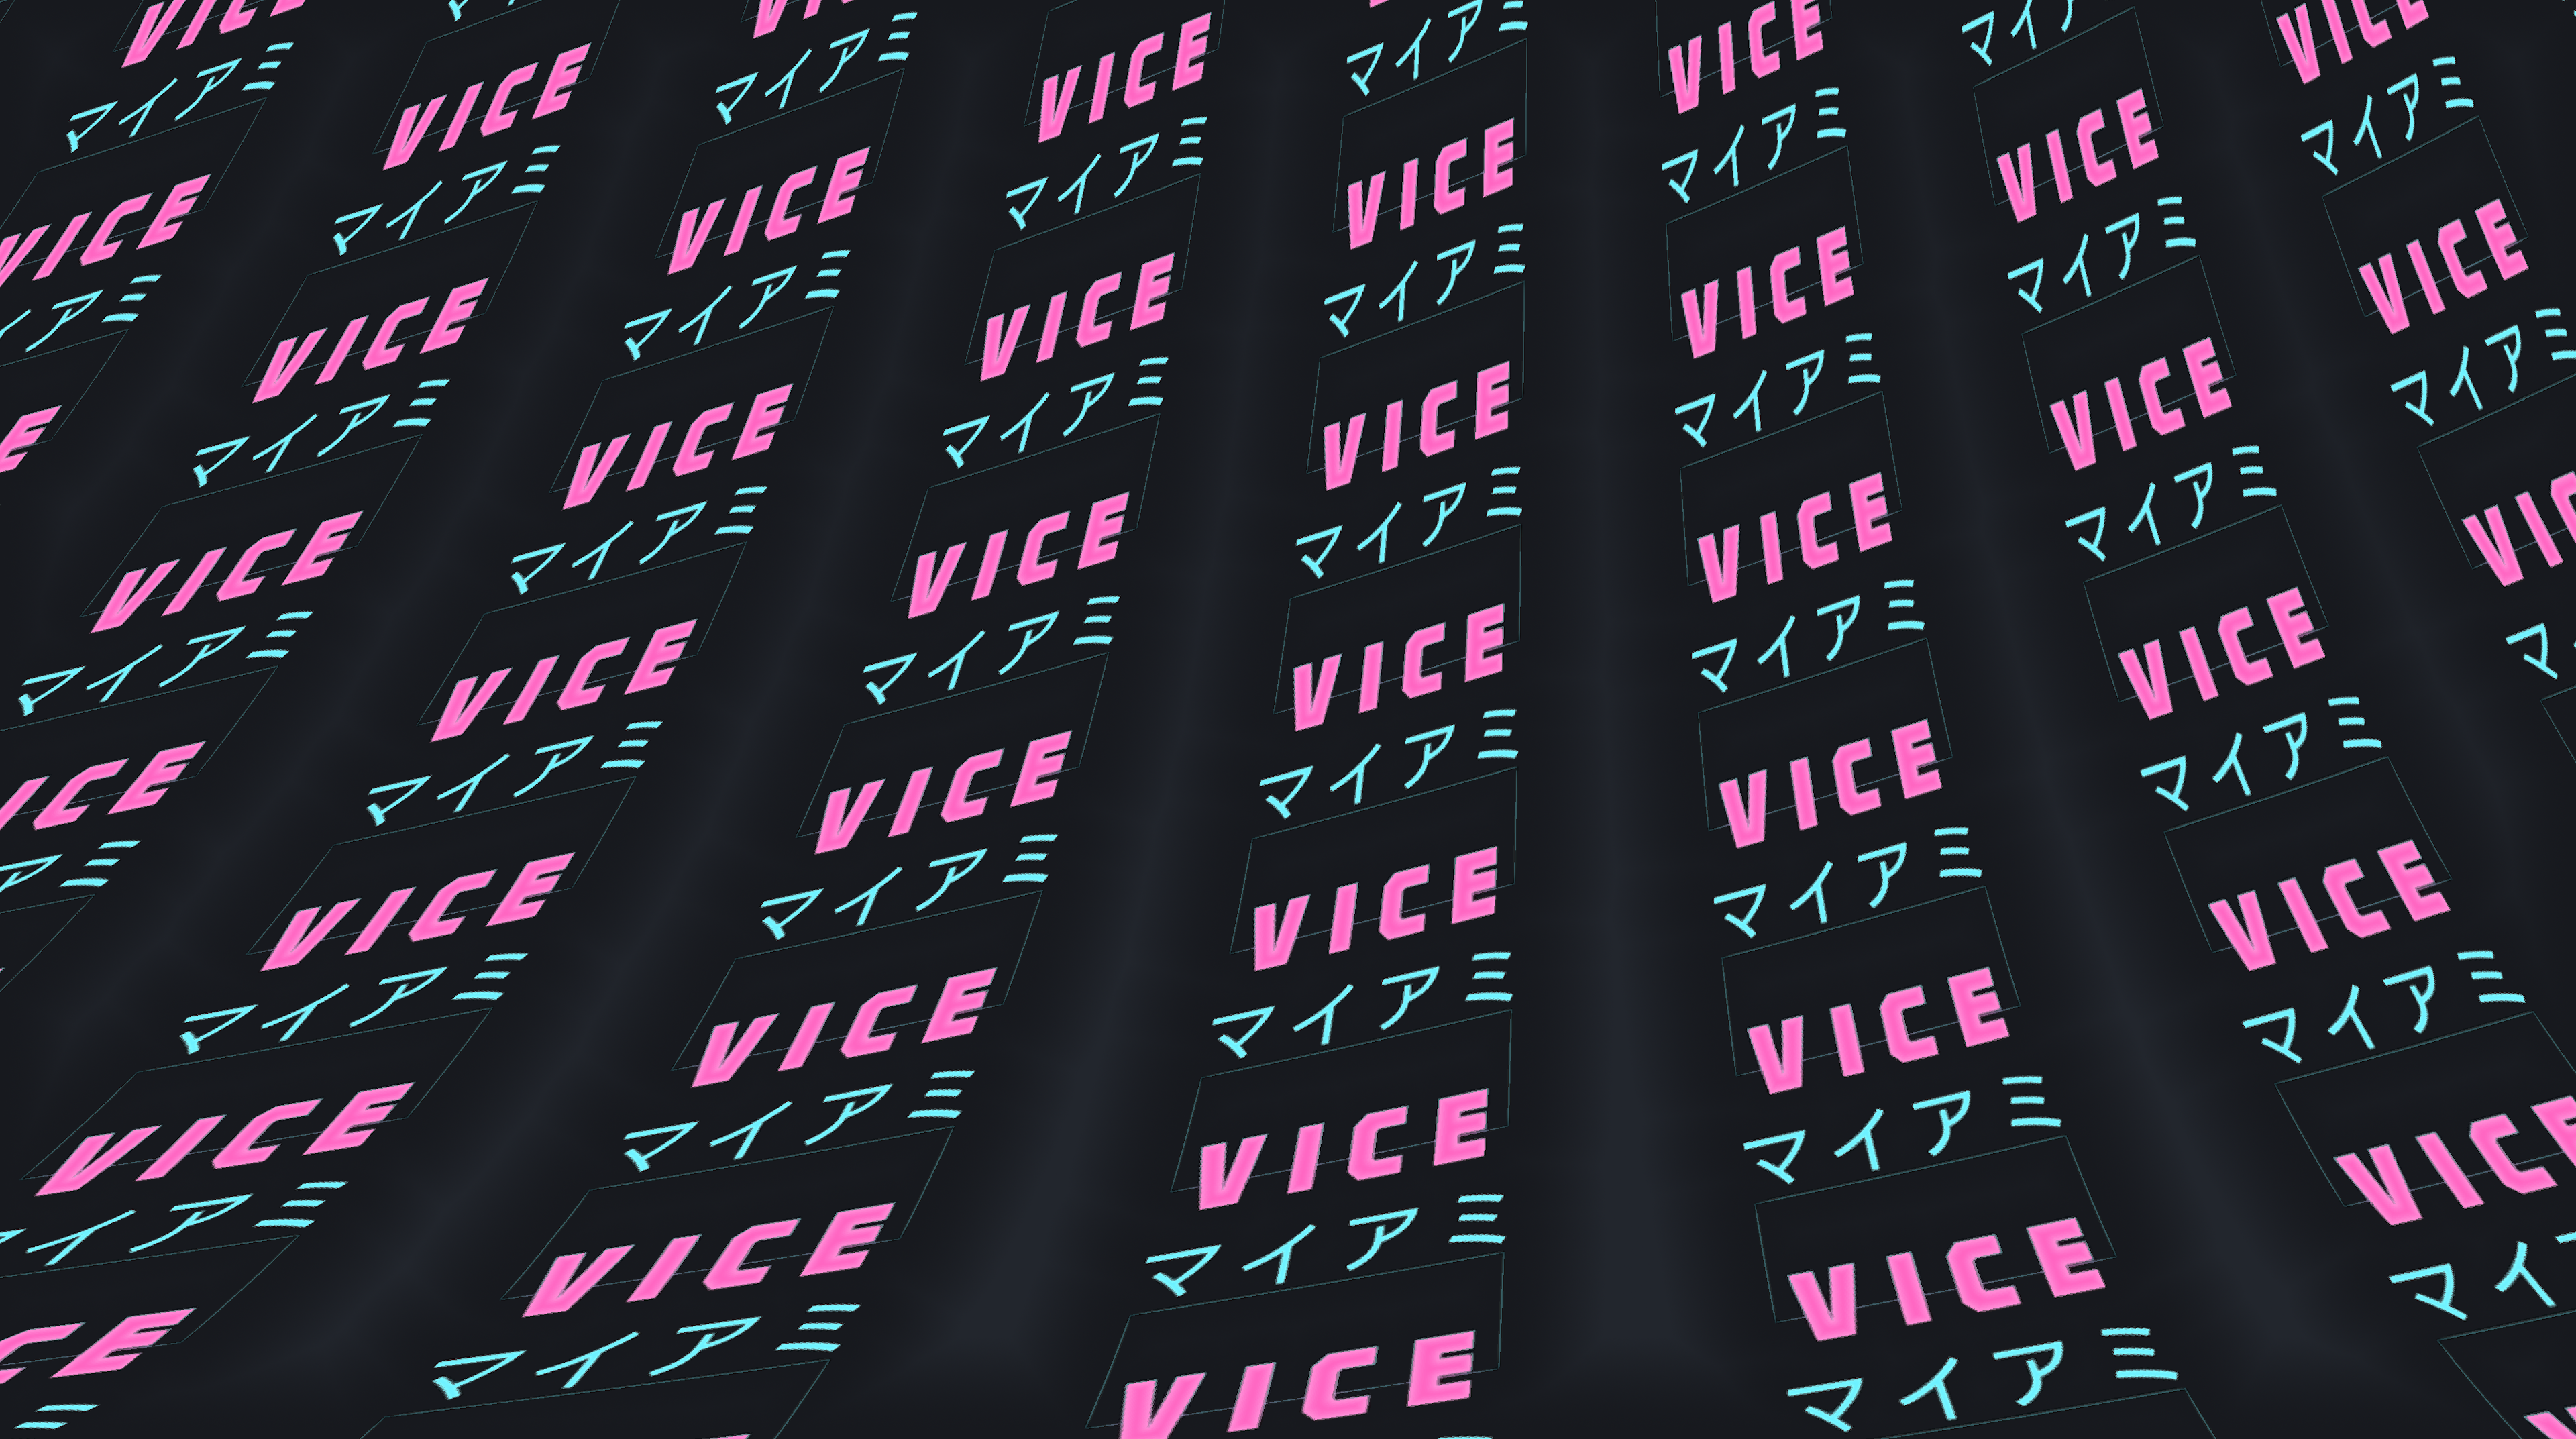 the vice color scheme being used in a piece of art I used as my wallpaper for well over a year.